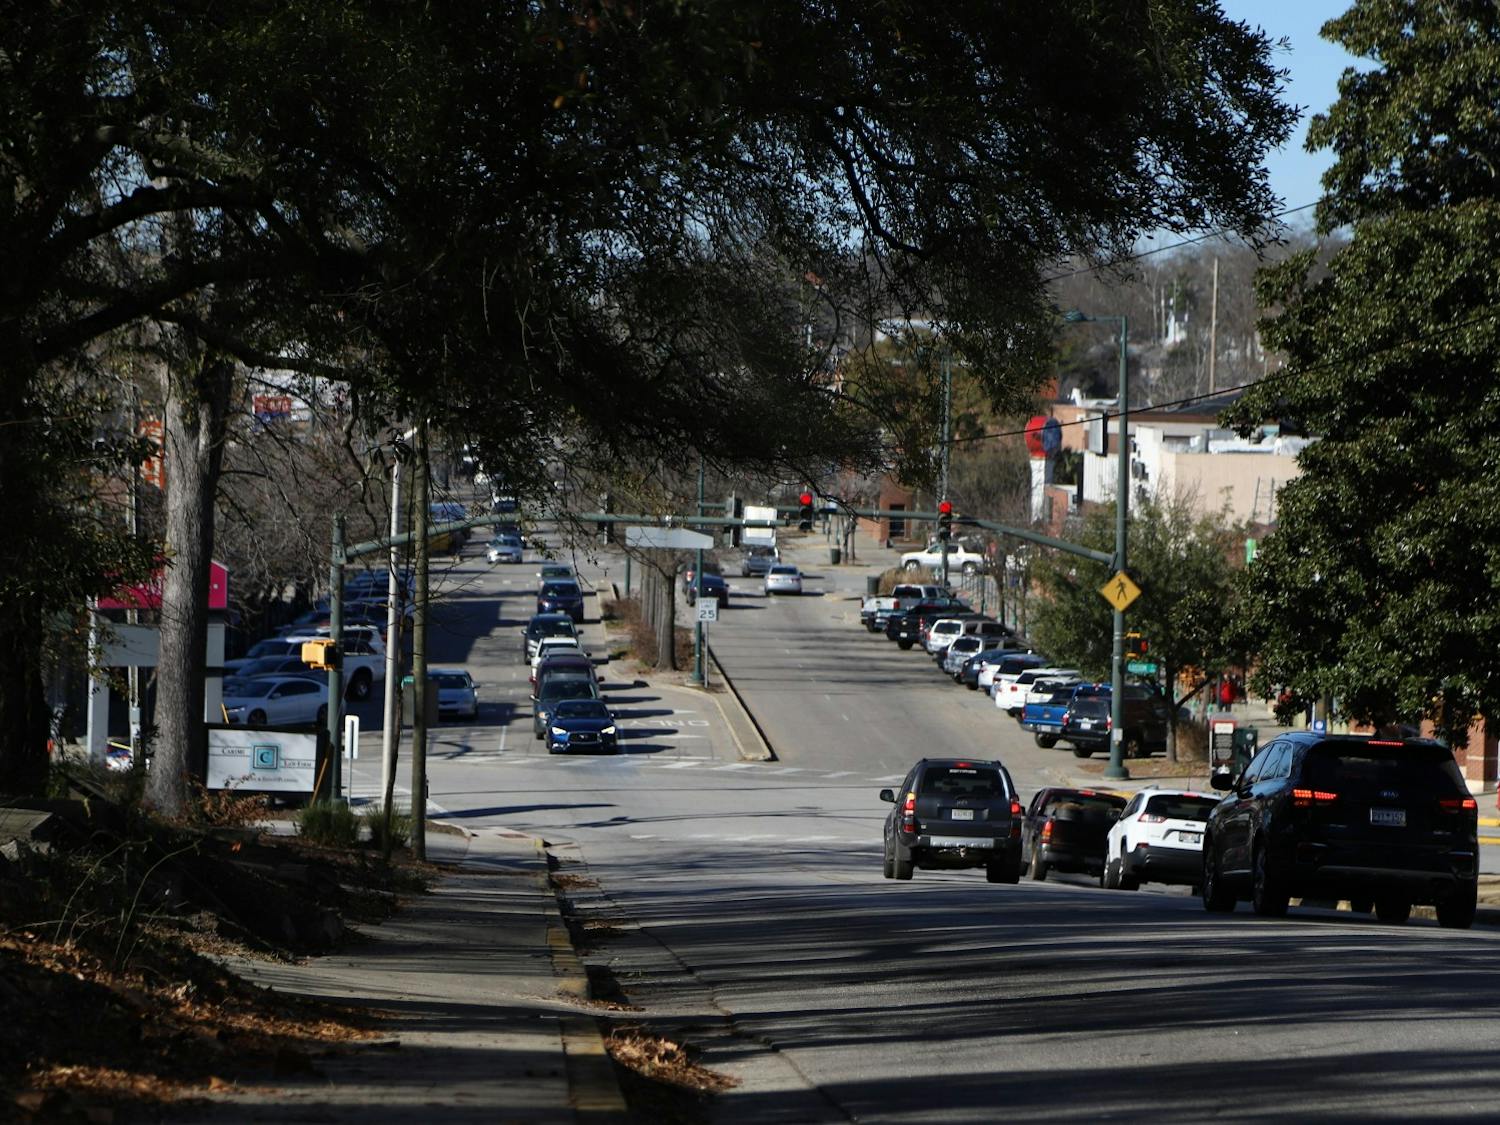 &nbsp;The intersection of Harden and Blossom Street at 4:03 p.m. on Jan. 29, 2021.&nbsp;